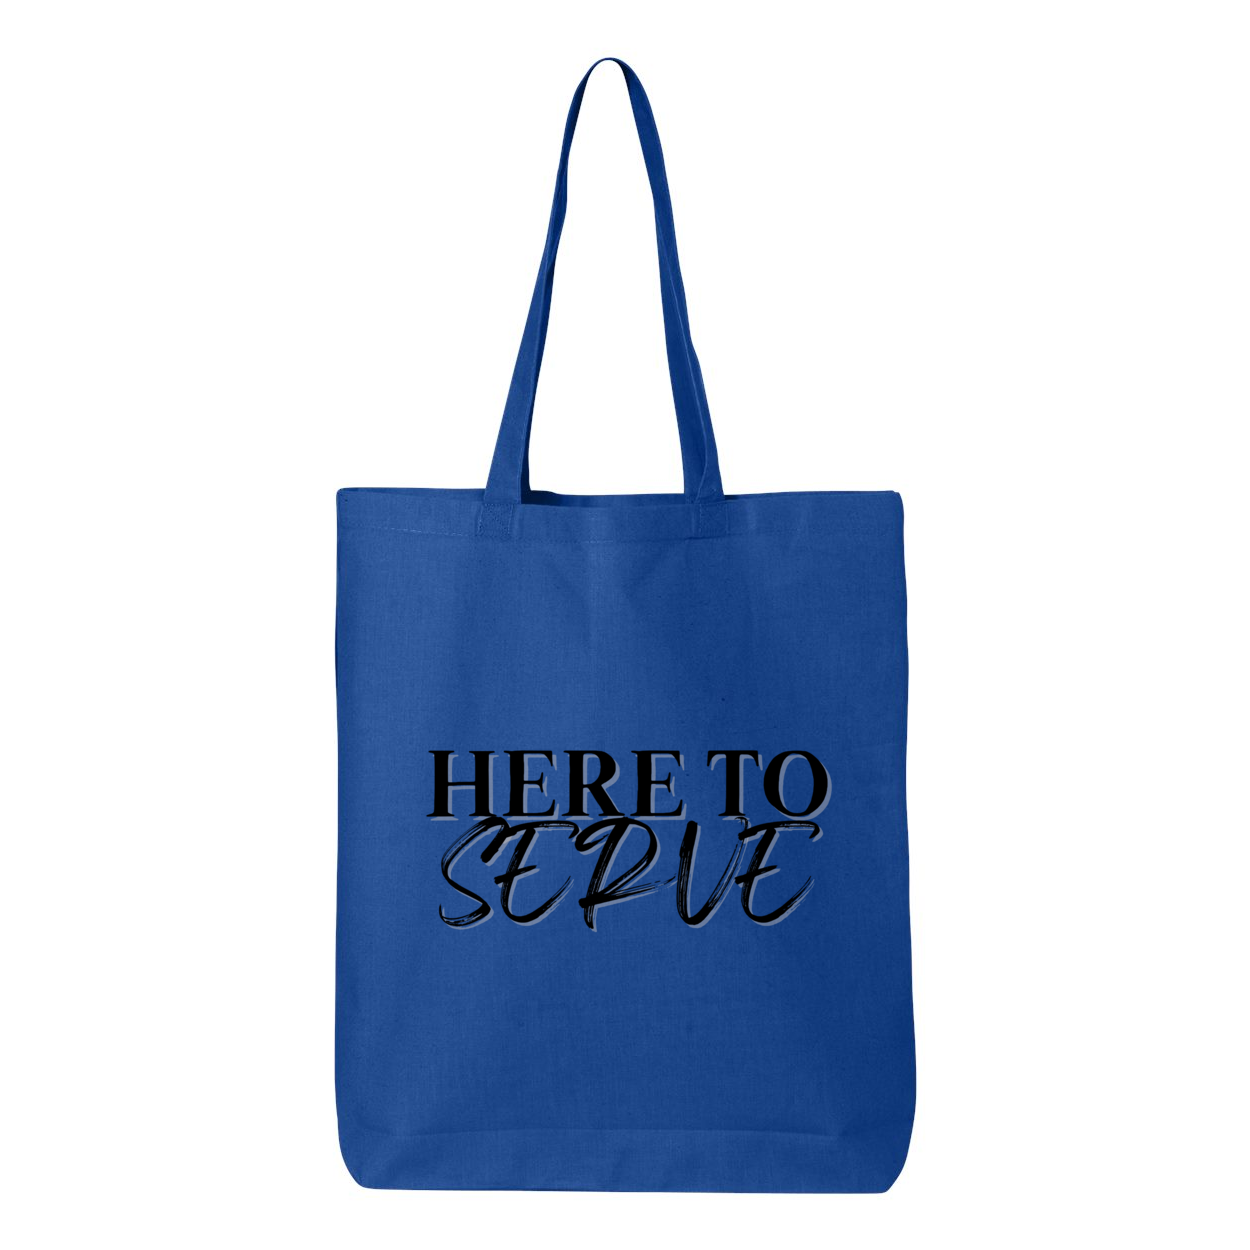 Here to Serve Tote